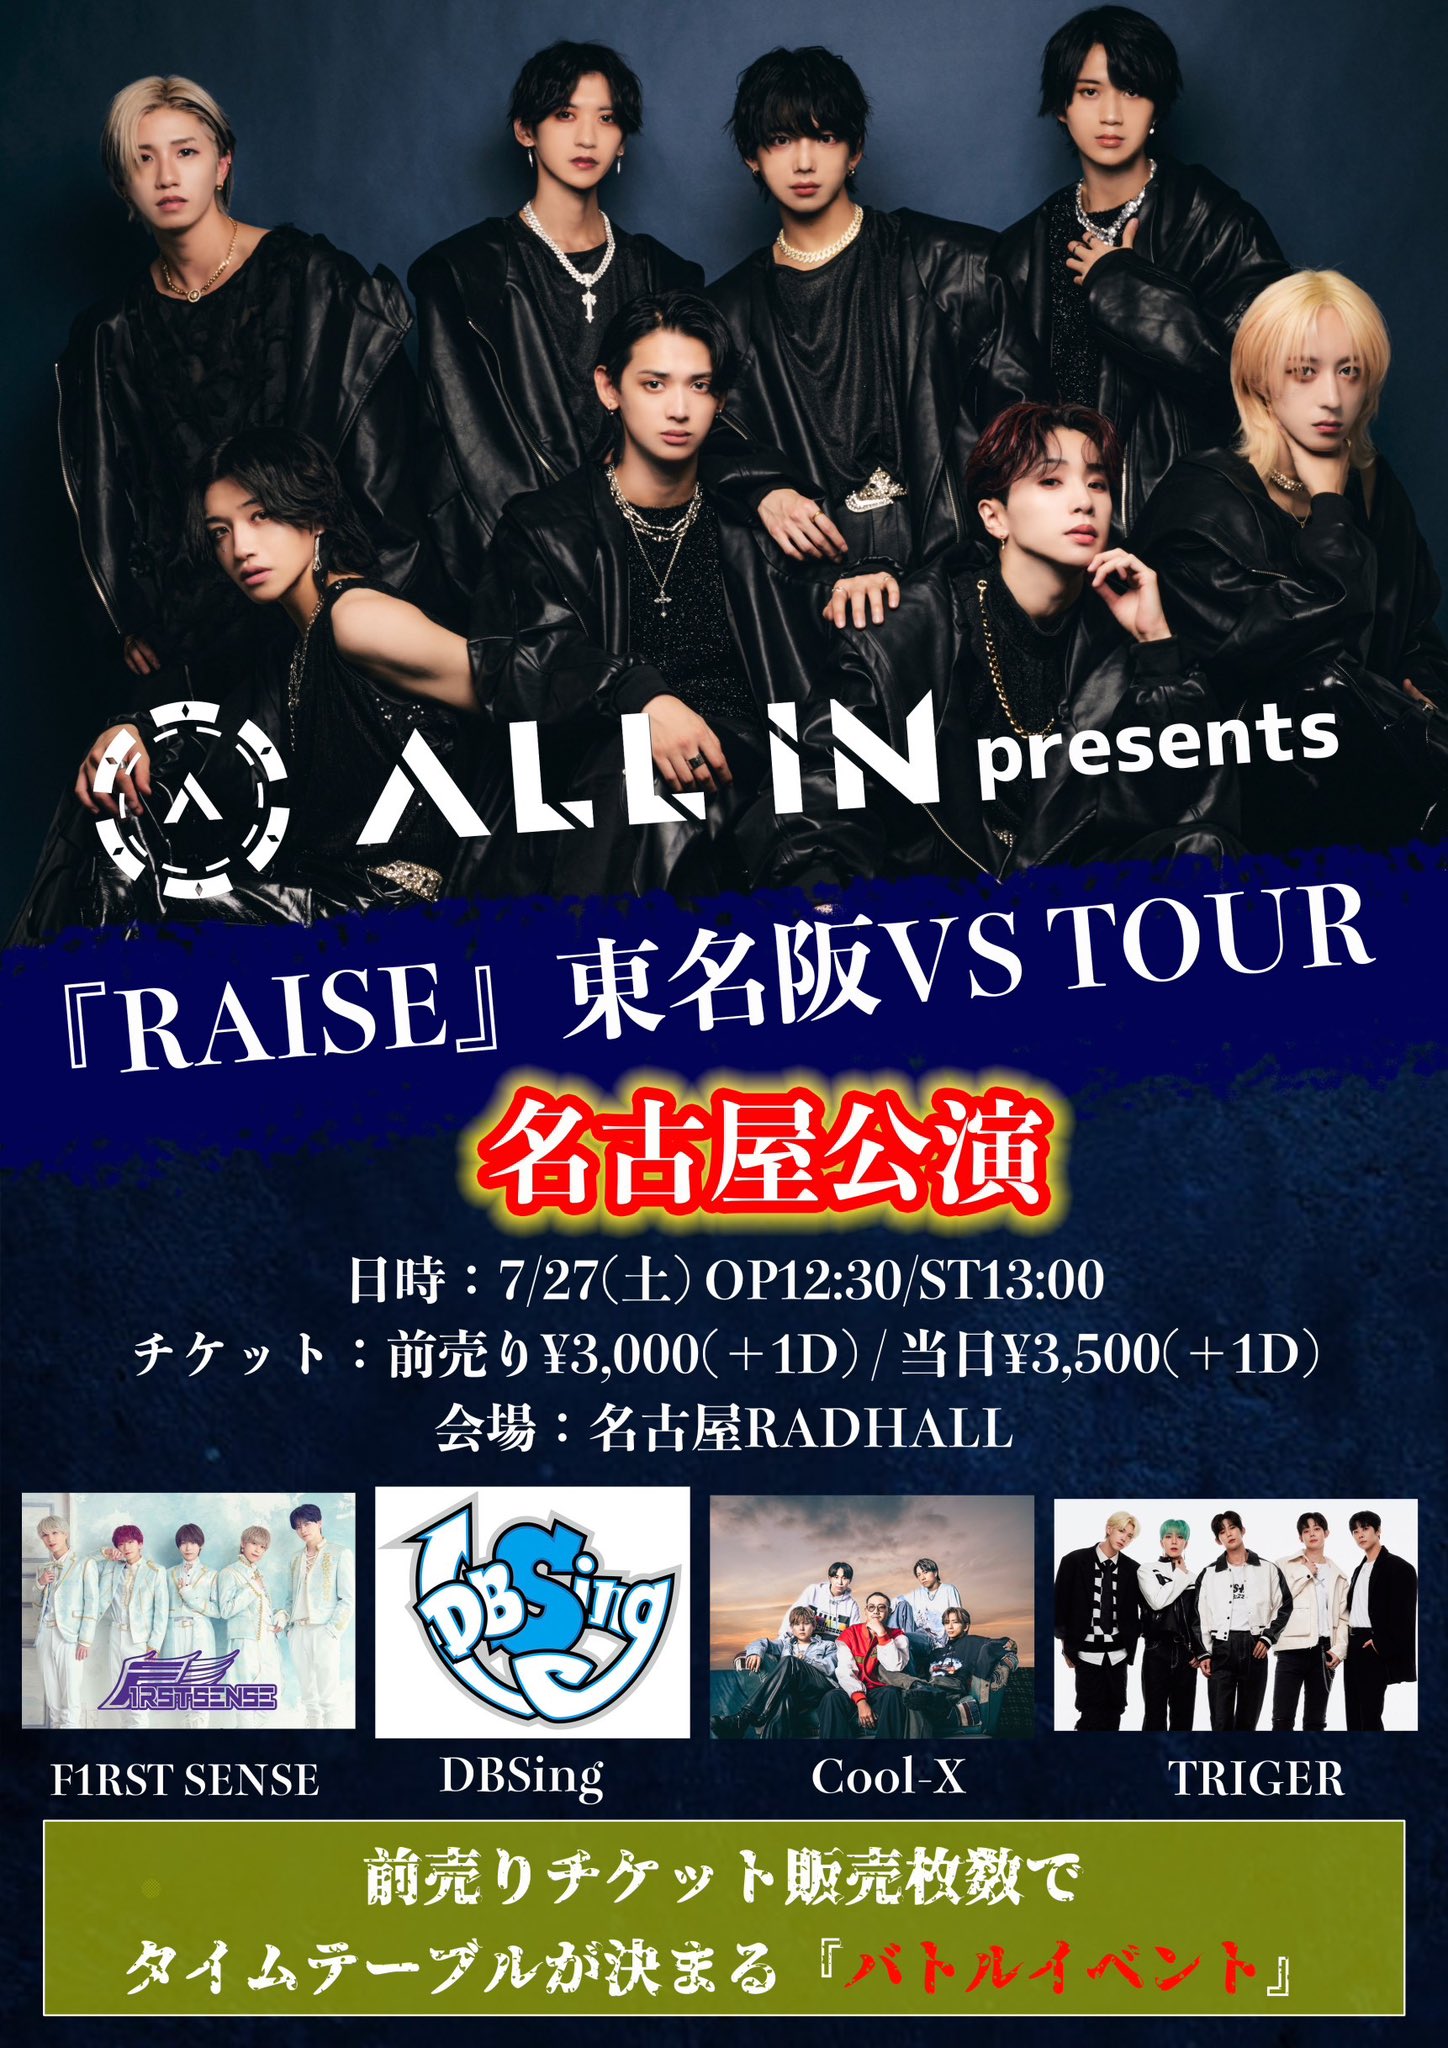 ALL IN主催『RAISE』東名阪TOUR